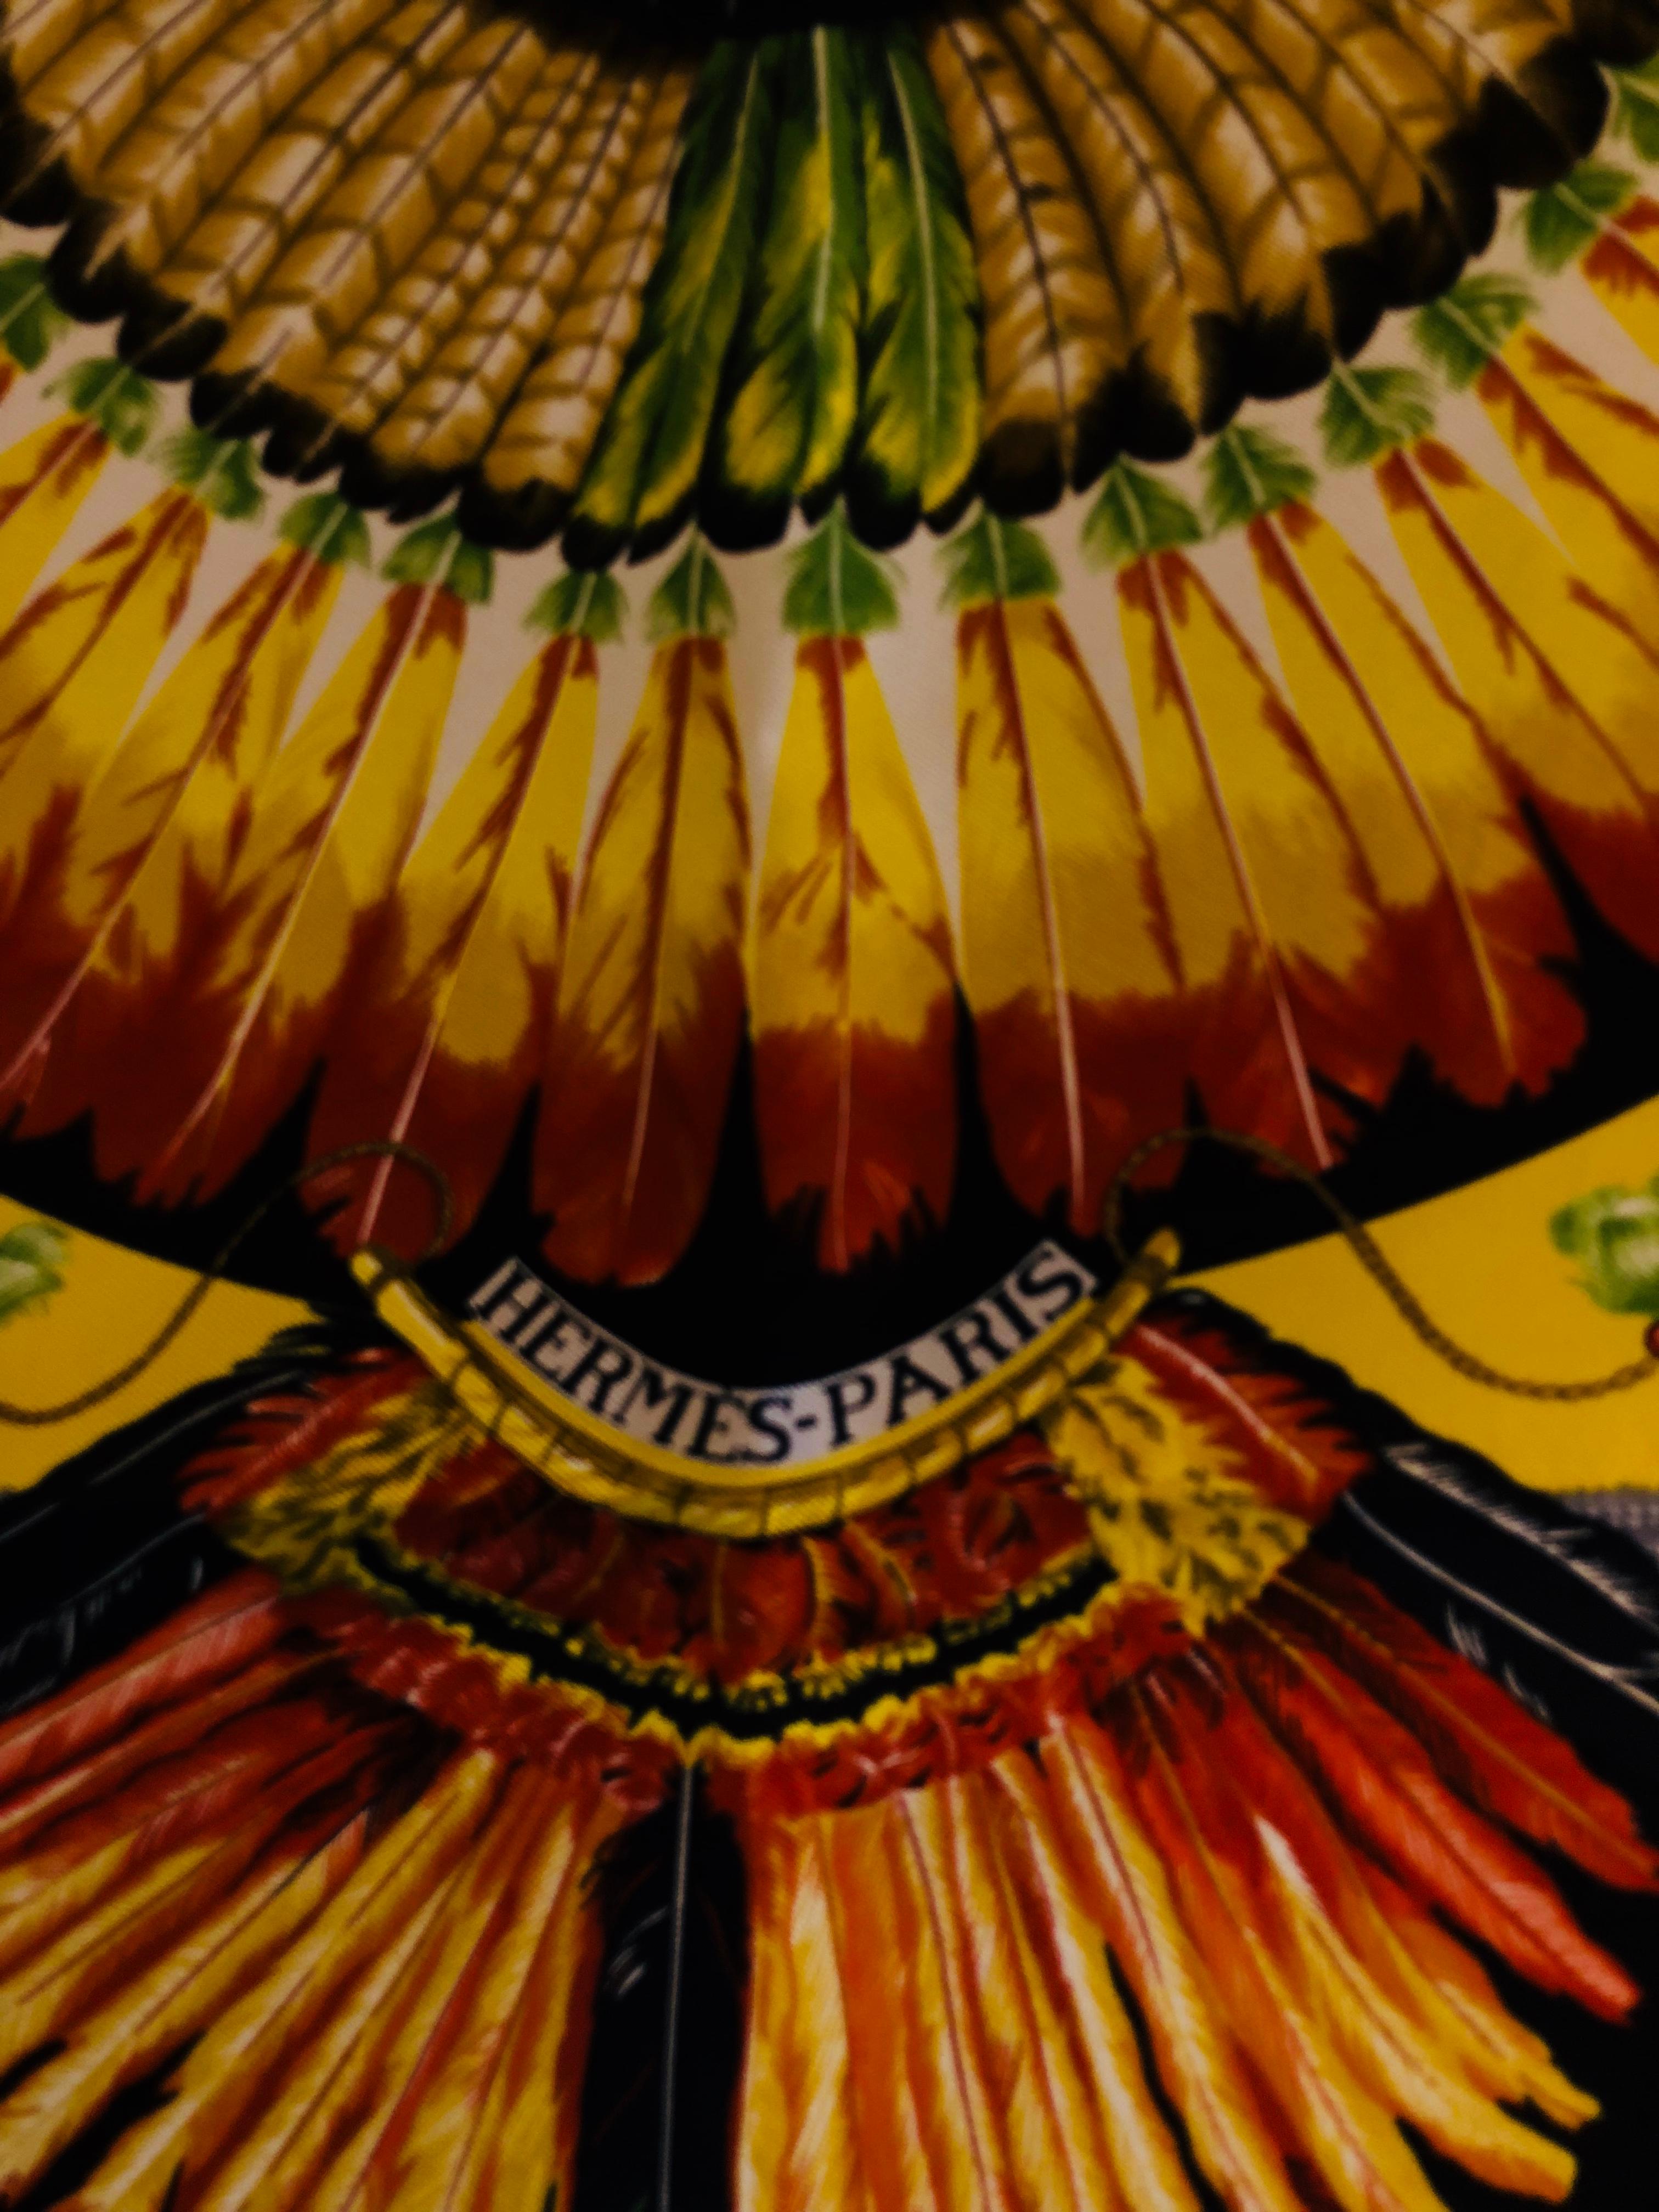 Designed by Laurence Bourthoumieux, this 1988 silk twill scarf features graphics indigenous to Brazil such as feathers, beads, head pieces and wood.

The colors are brilliant, with a yellow background and oranges, greens, grey, white and black. The